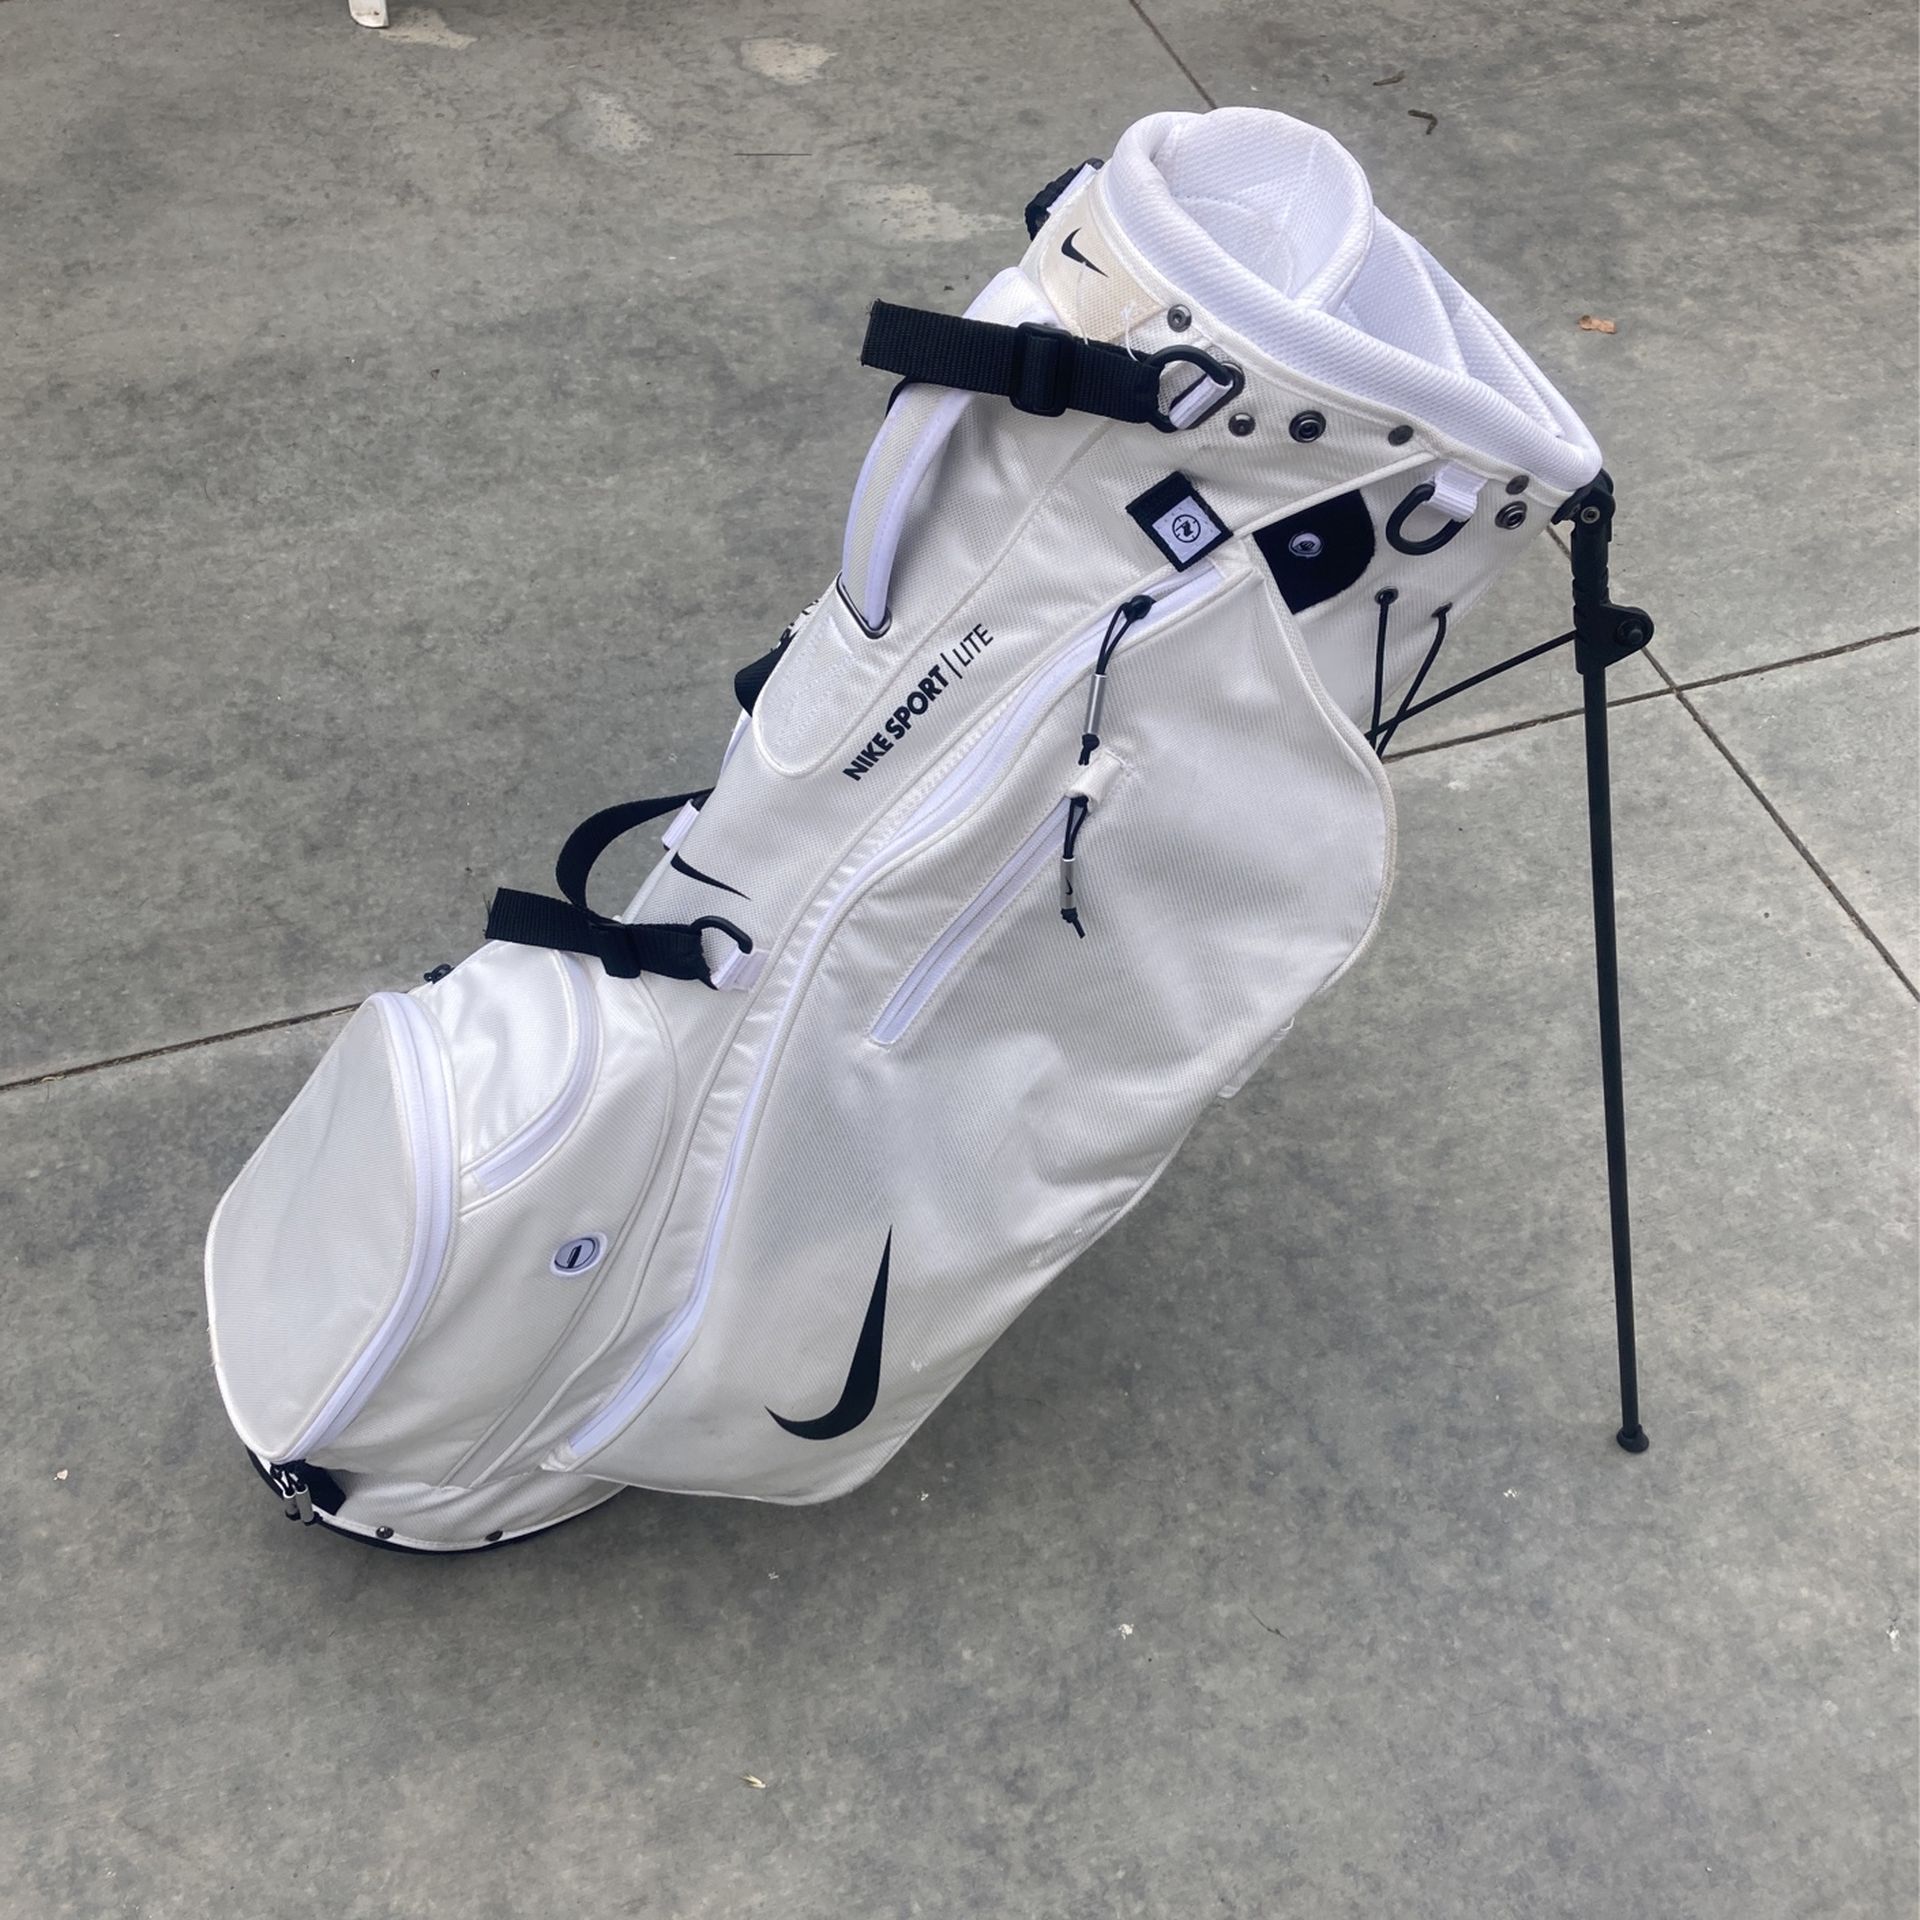 Golf Nike Stand Bag w/Shoulder Straps for Sale in Paramount, CA - OfferUp